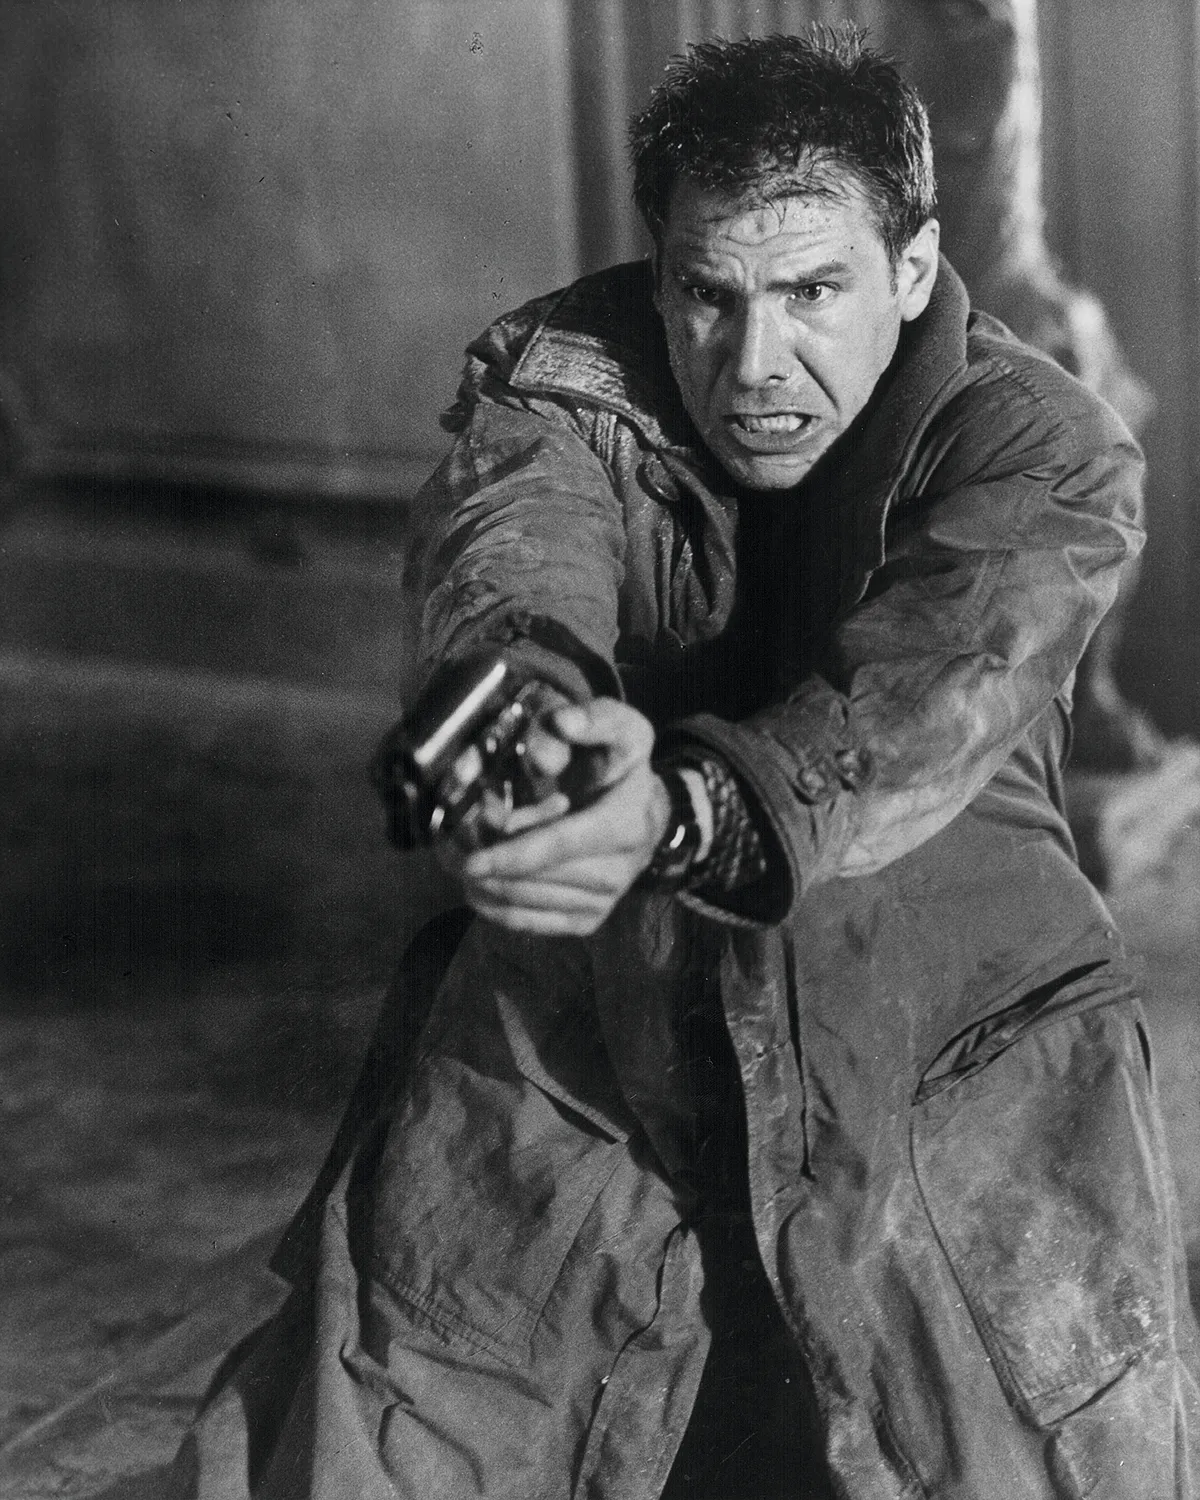 Actor Harrison Ford holding a gun, in a scene from the movie 'Blade Runner', 1982. (Photo by Stanley Bielecki Movie Collection/Getty Images)